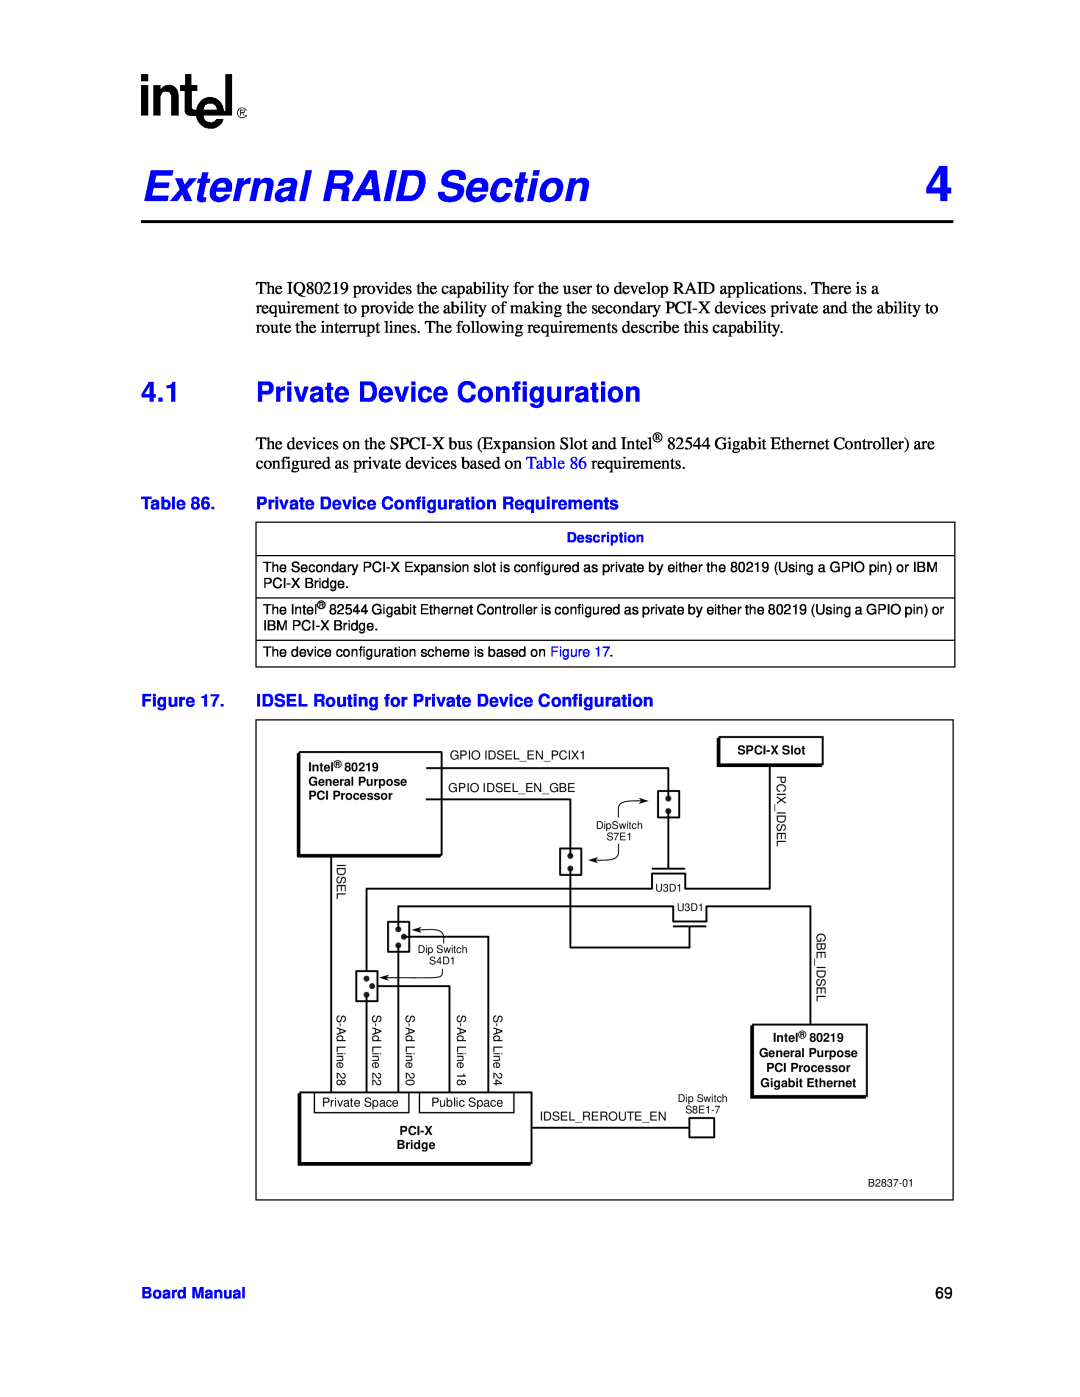 Intel IQ80219 manual External RAID Section, Private Device Configuration Requirements 